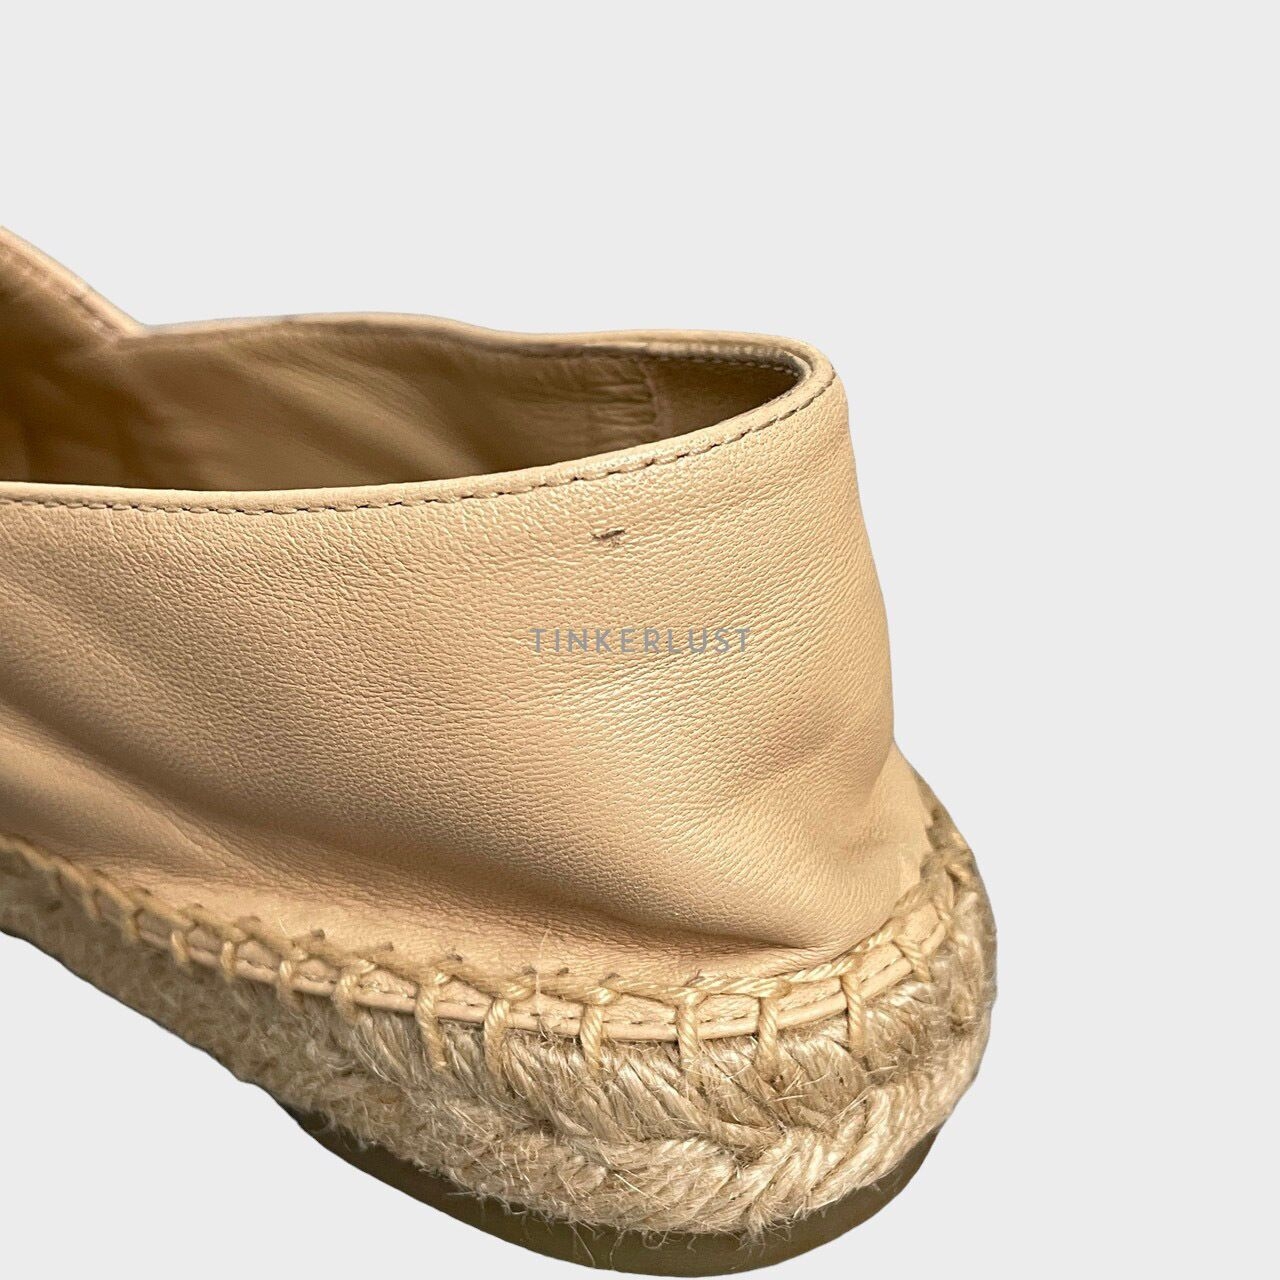 Chanel Beige Leather CC Quilted Espadrilles Flats